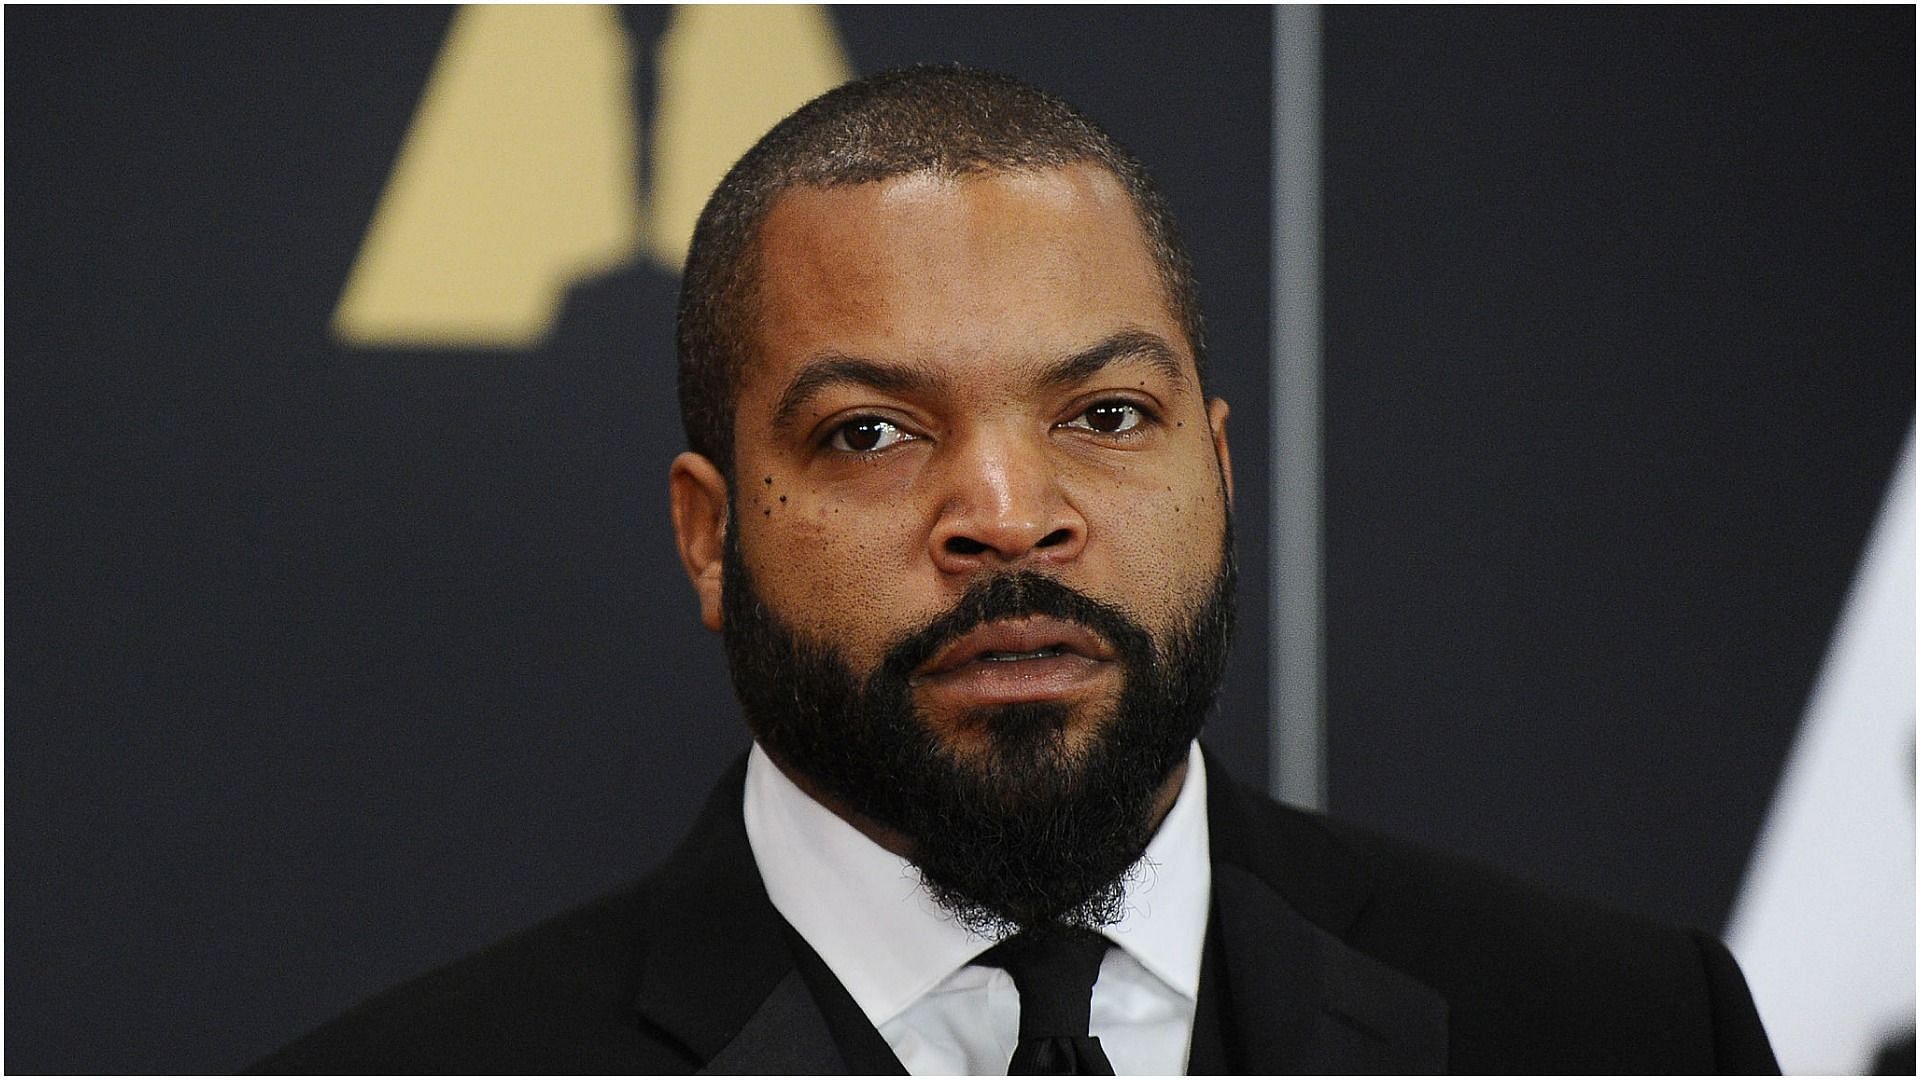 Ice Cube attends the 7th annual Governors Awards at The Ray Dolby Ballroom at Hollywood &amp; Highland Center on November 14, 2015, in Hollywood, California (Image via Getty Images)